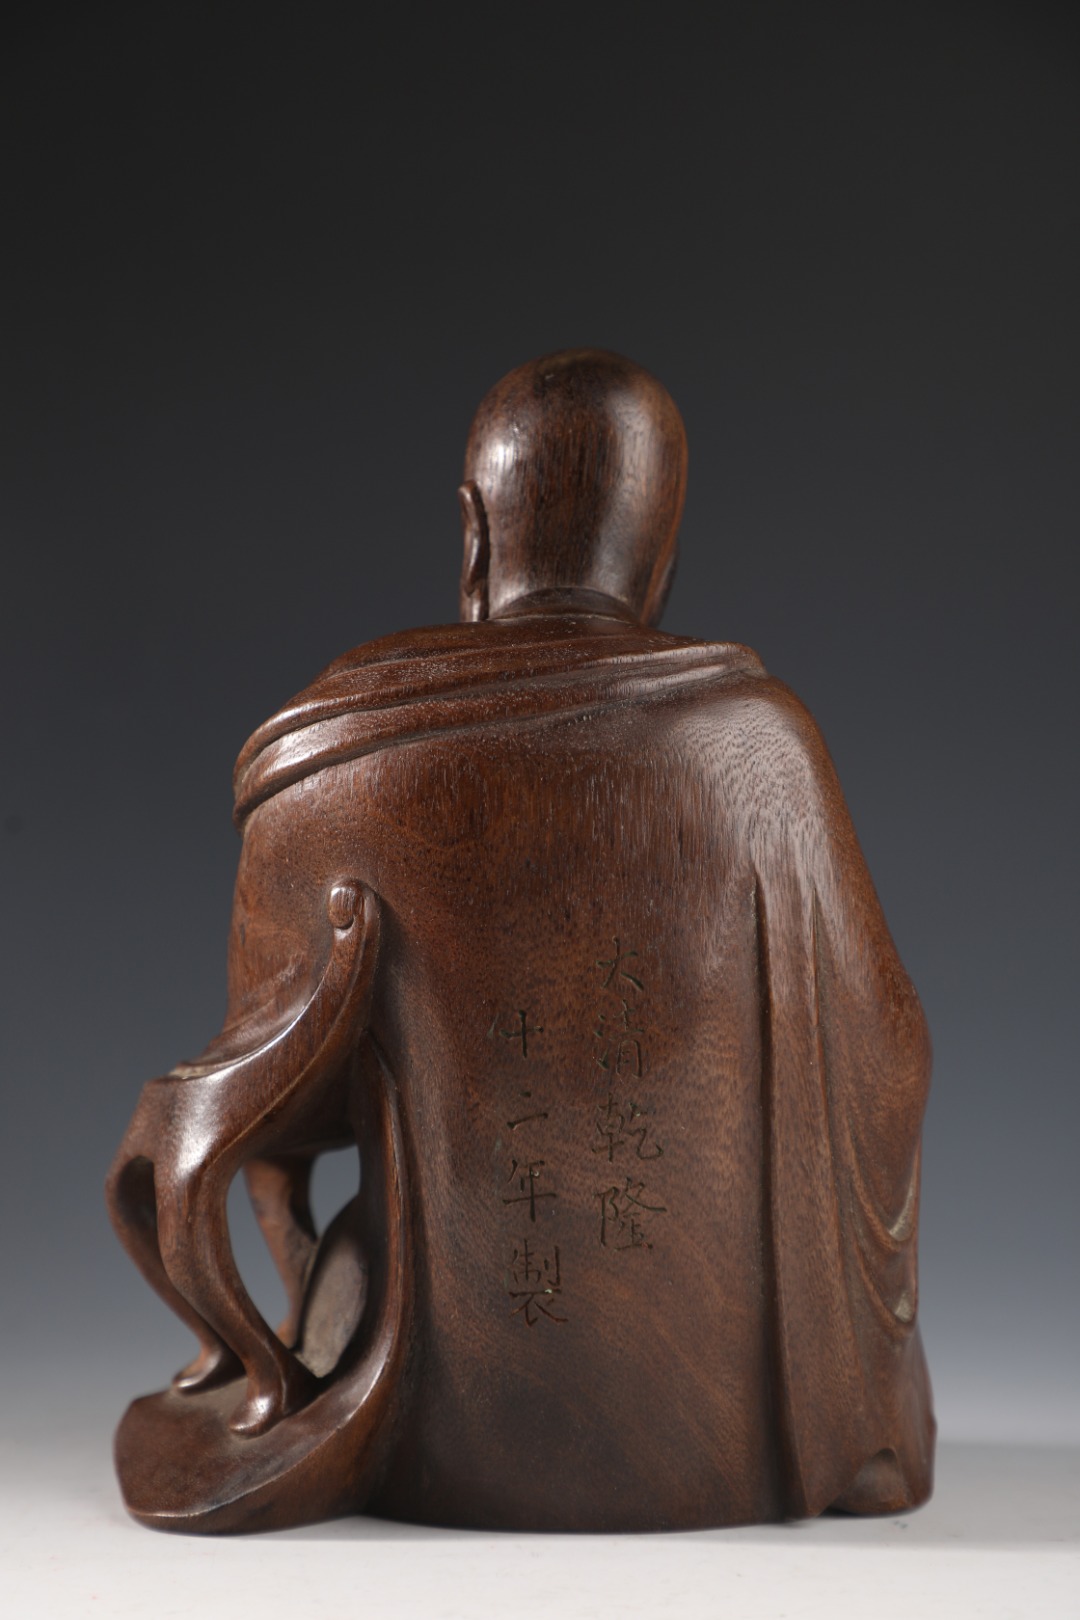 Qing Dynasty: Precious sunk old agarwood medicine fairy seated statue - Image 6 of 9